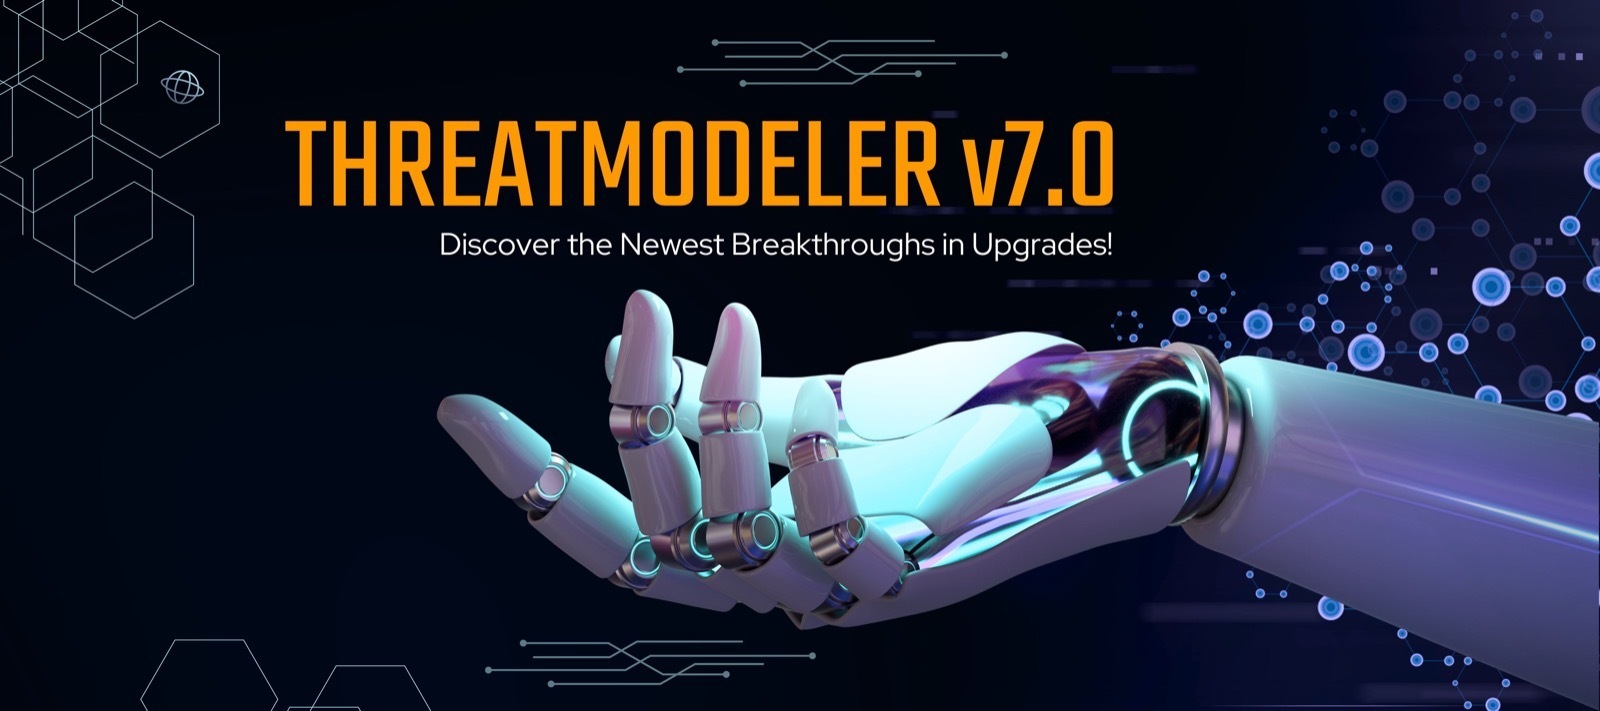 ThreatModeler 7.0 vs. 6.0: What's the Upgrade Buzz About?